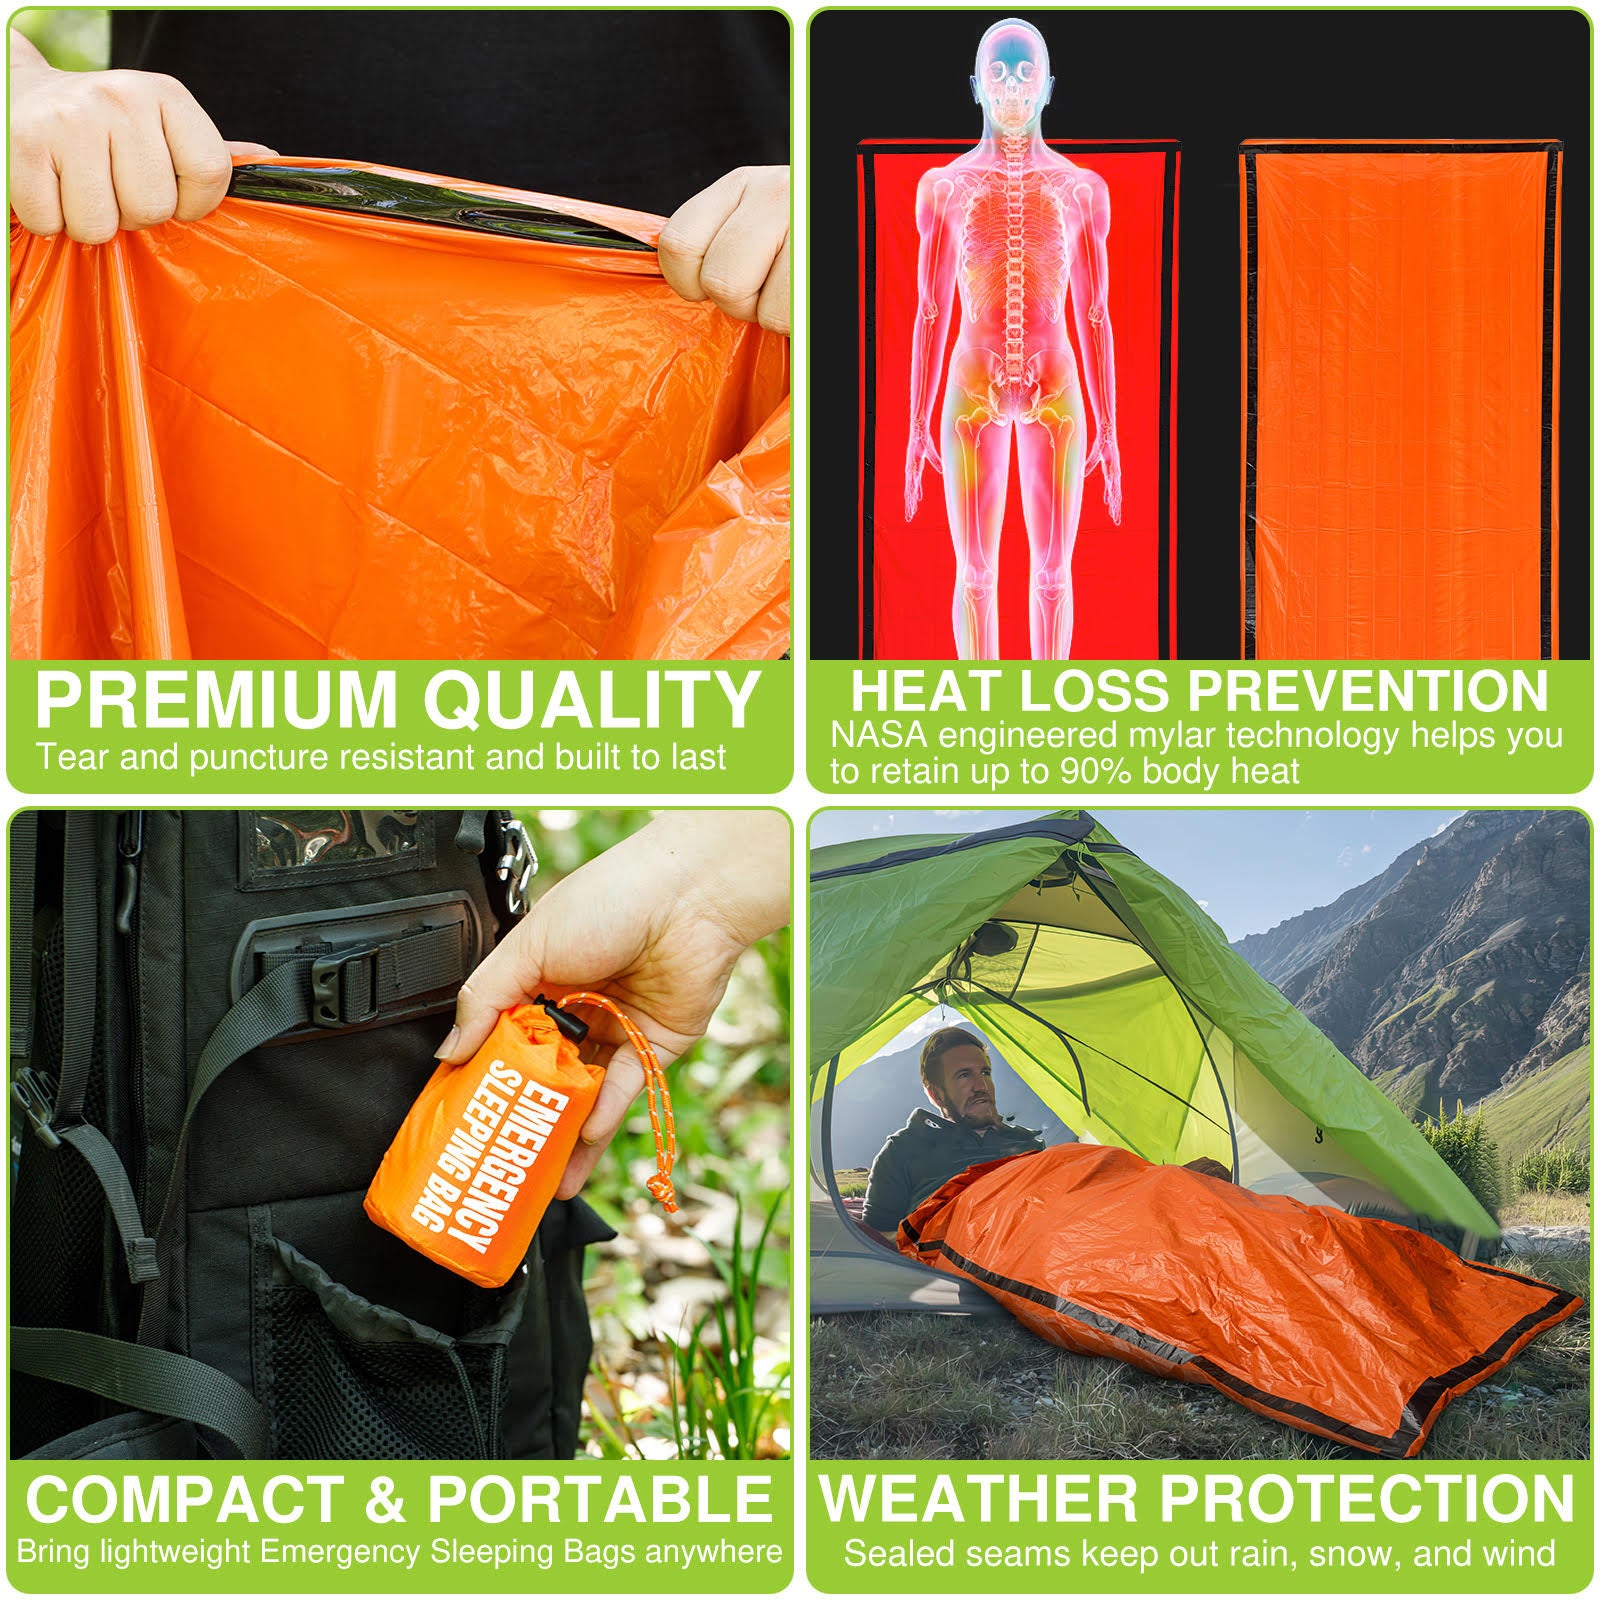 quality and body protection